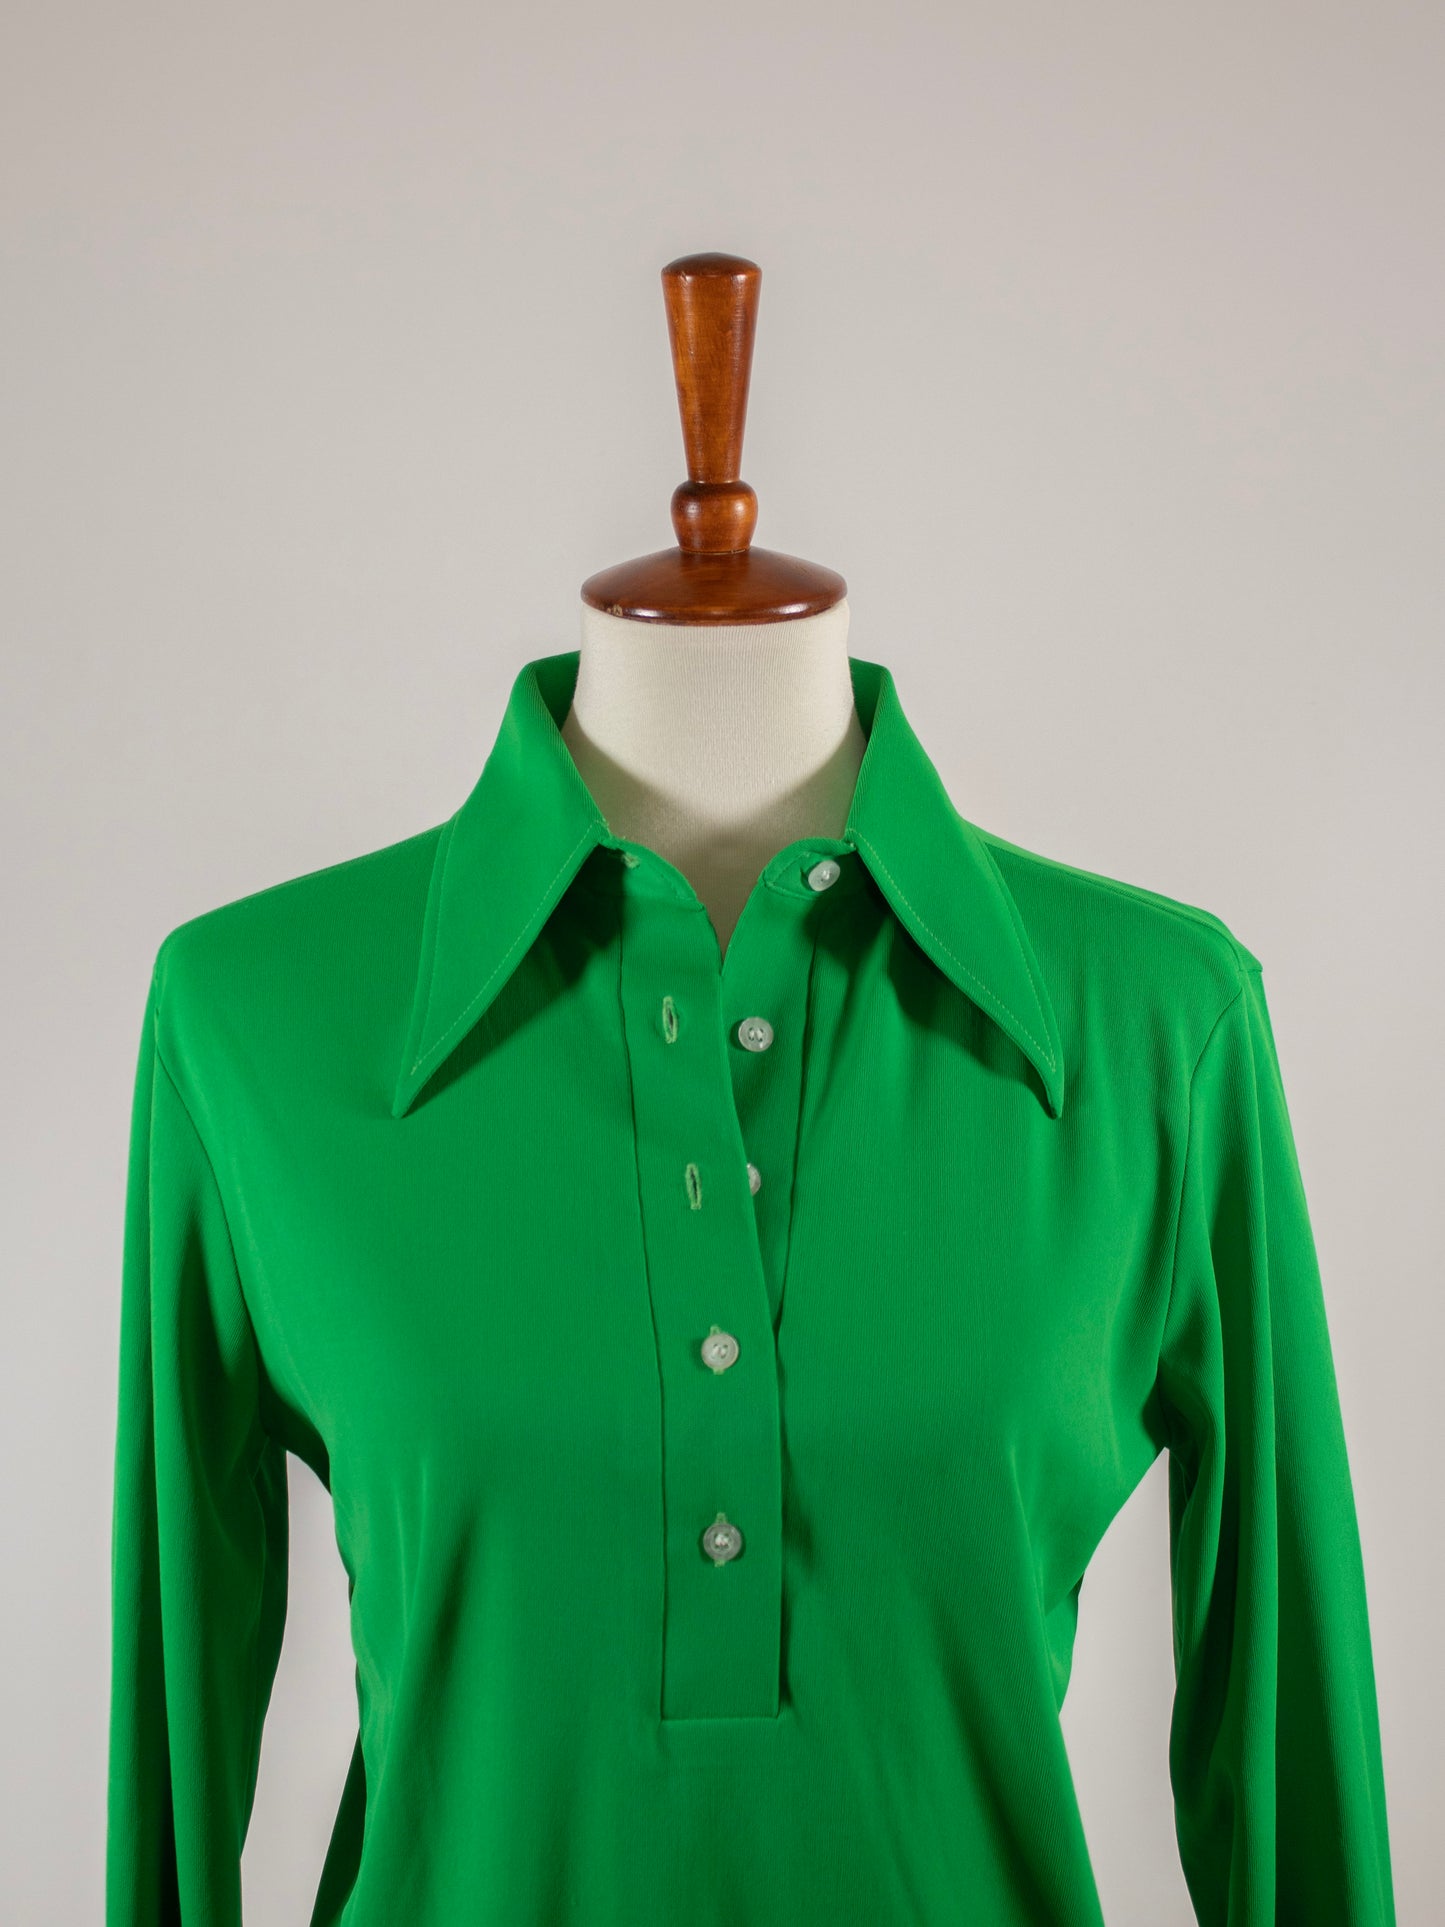 1970s Green Button Up